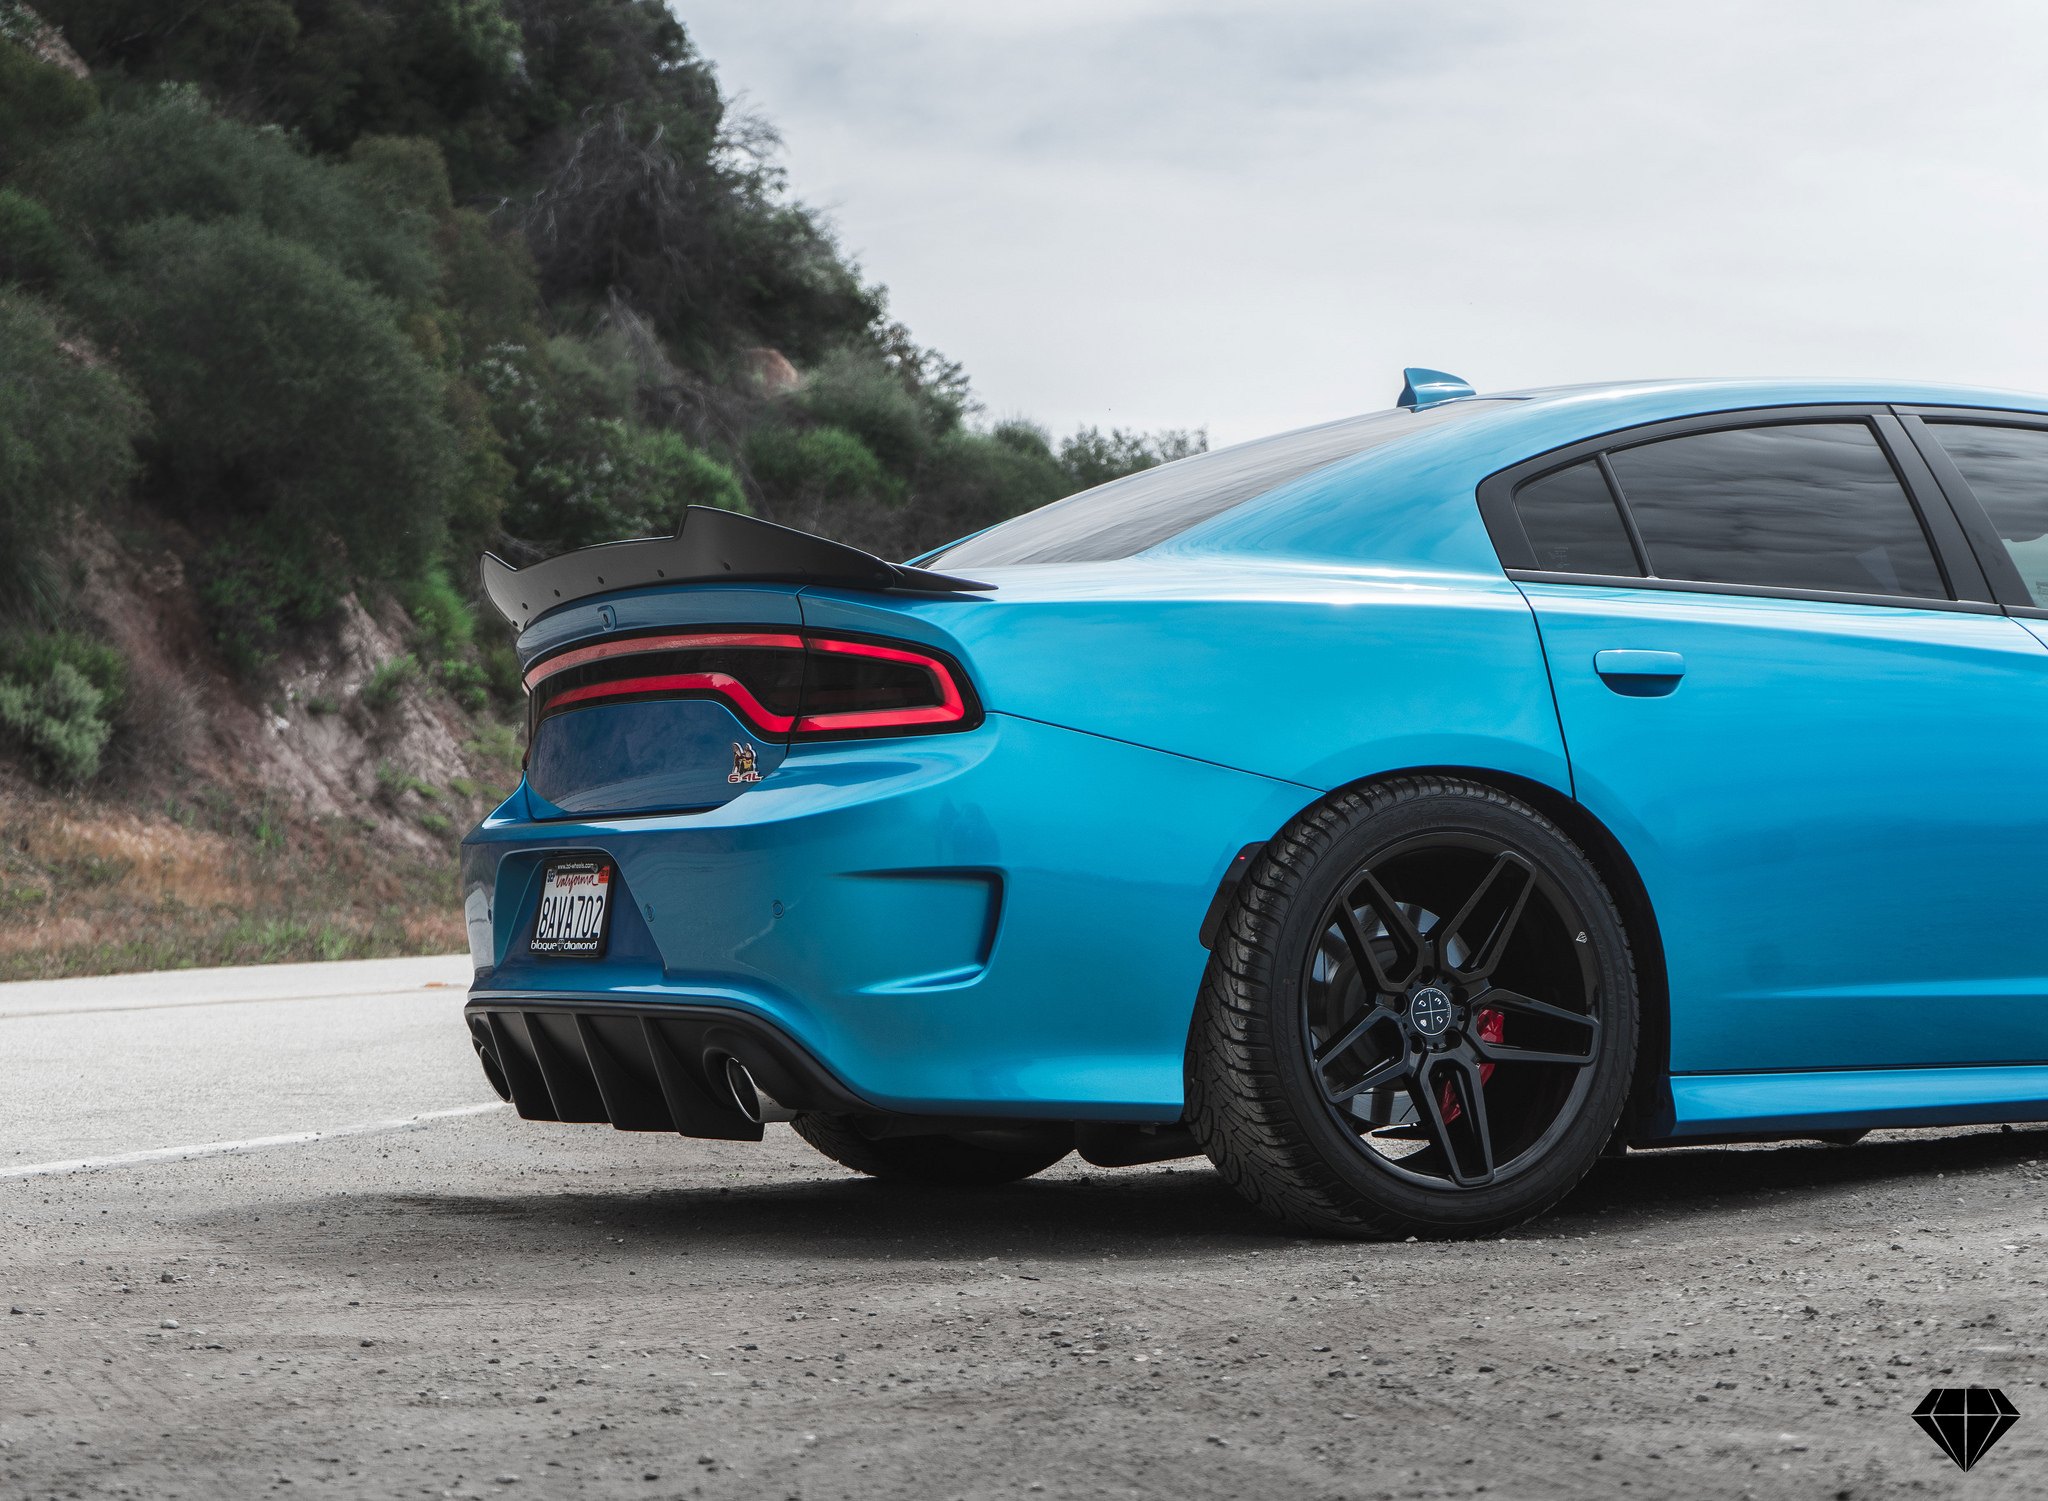 Aftermarket Rear Diffuser on Blue Dodge Charger - Photo by Blaque Diamond Wheels